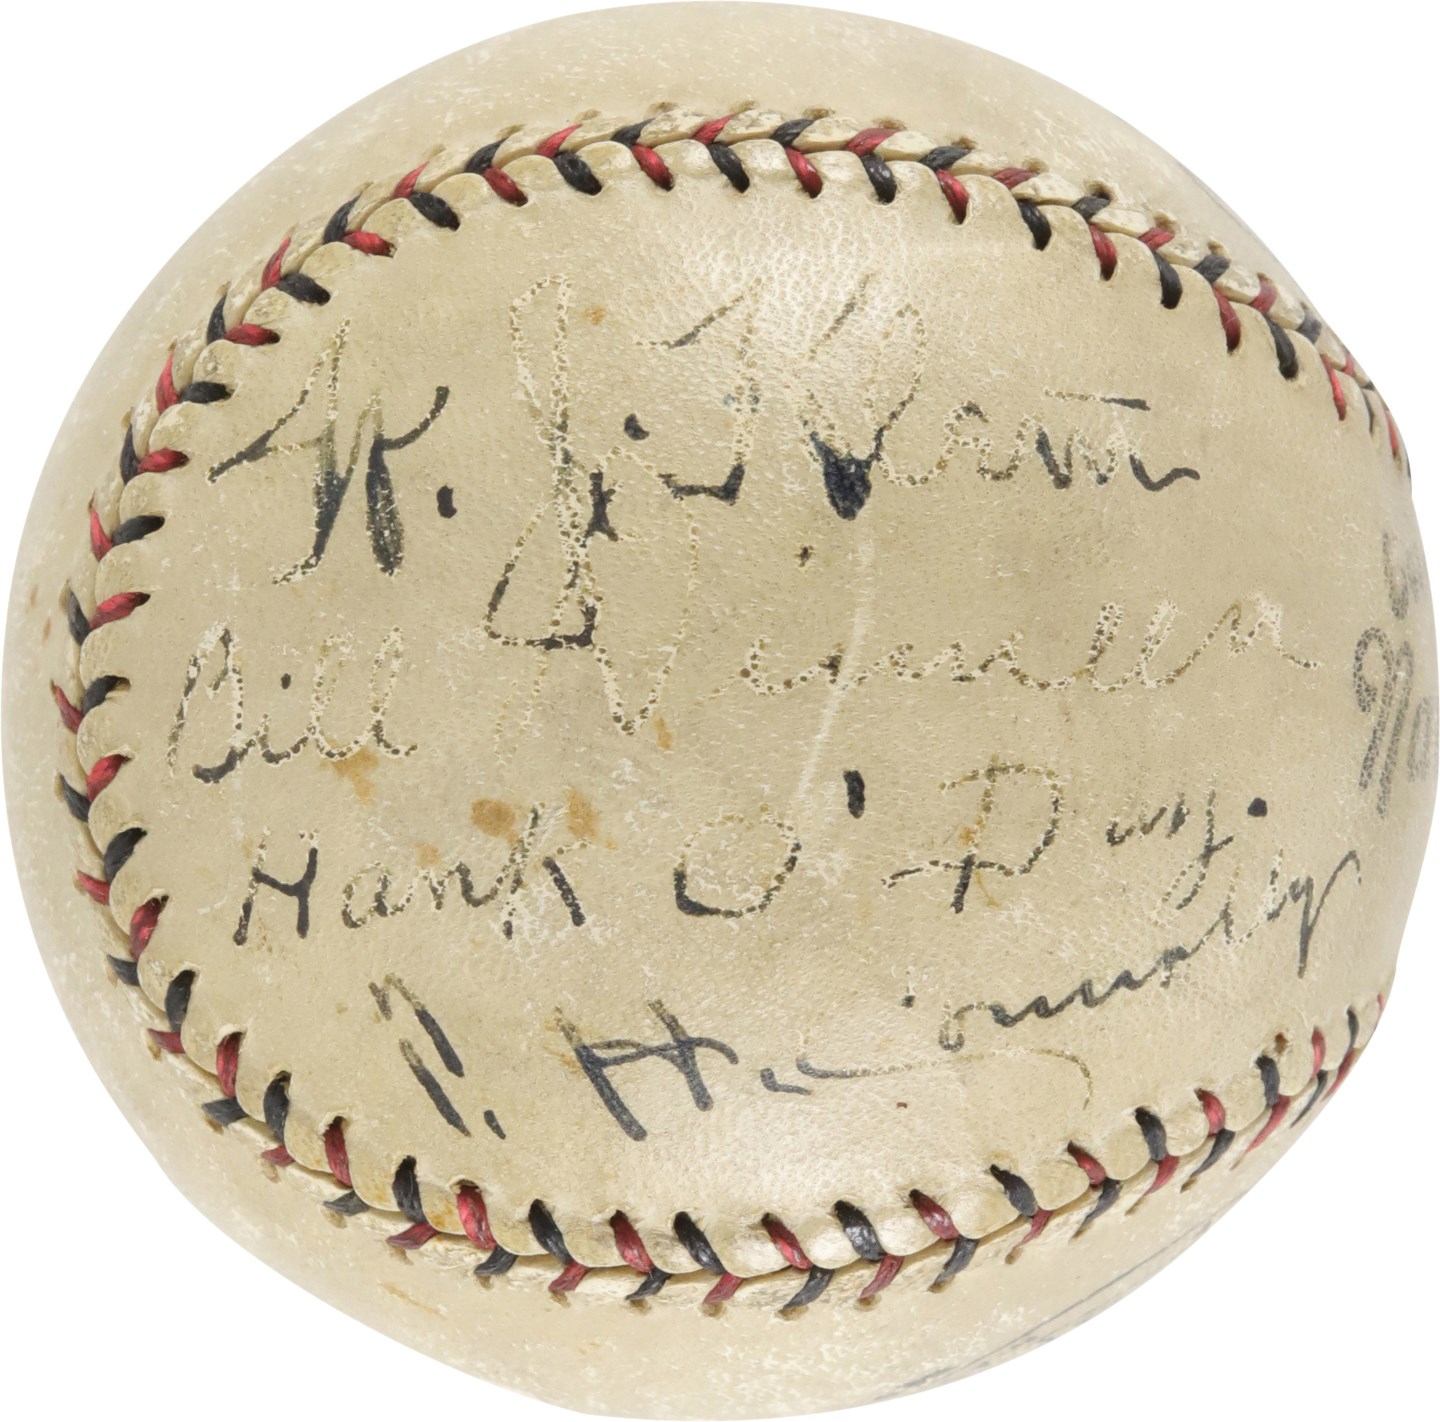 - 1920 World Series Umpire Crew Signed Baseball with Hank O'Day & Tom Connolly (PSA)